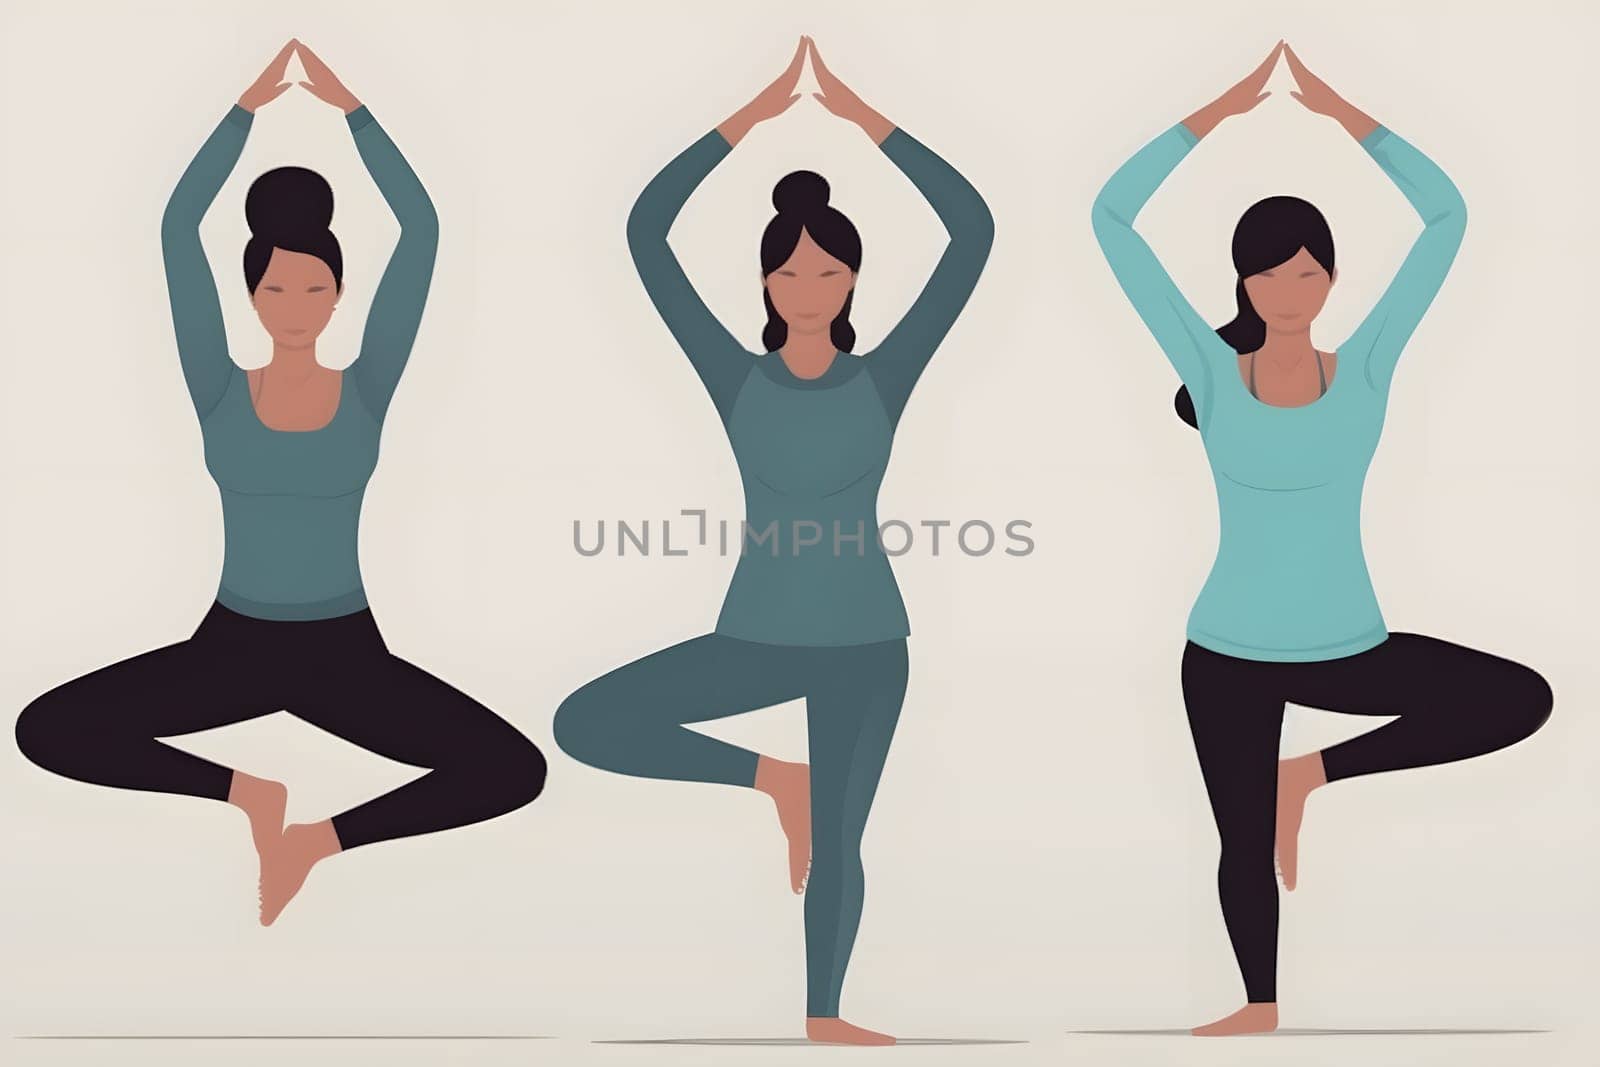 Set of women in full-lenght long sleeves sports uniform doing yoga. Neural network generated in May 2023. Not based on any actual person, scene or pattern.